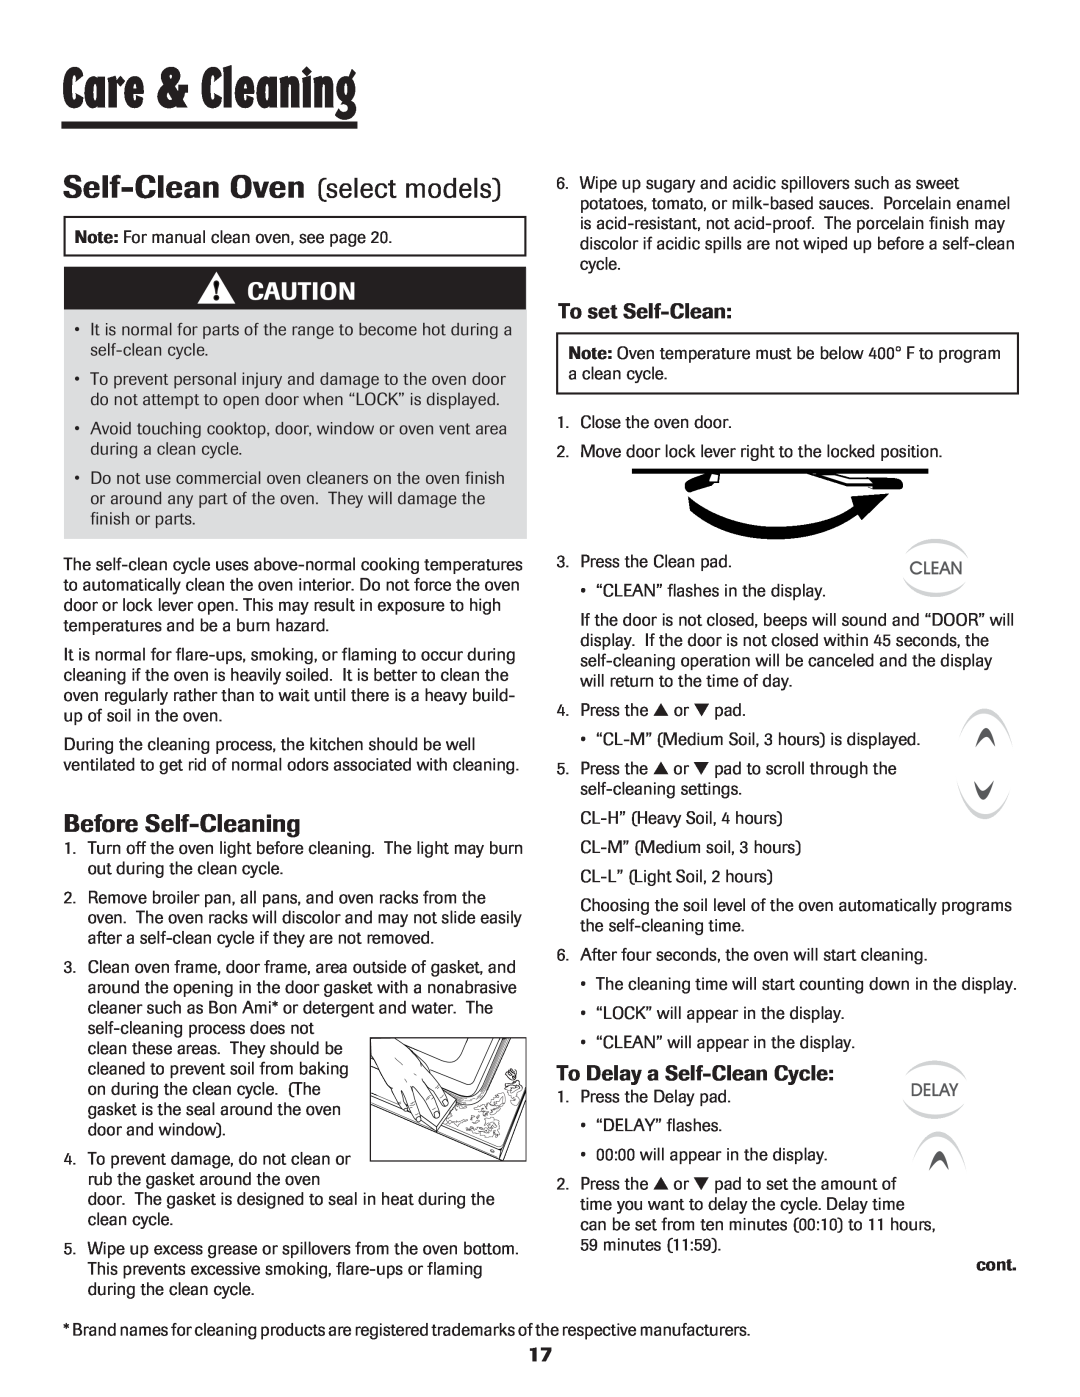 Maytag Oven warranty Care & Cleaning, Before Self-Cleaning, To set Self-Clean, To Delay a Self-CleanCycle 